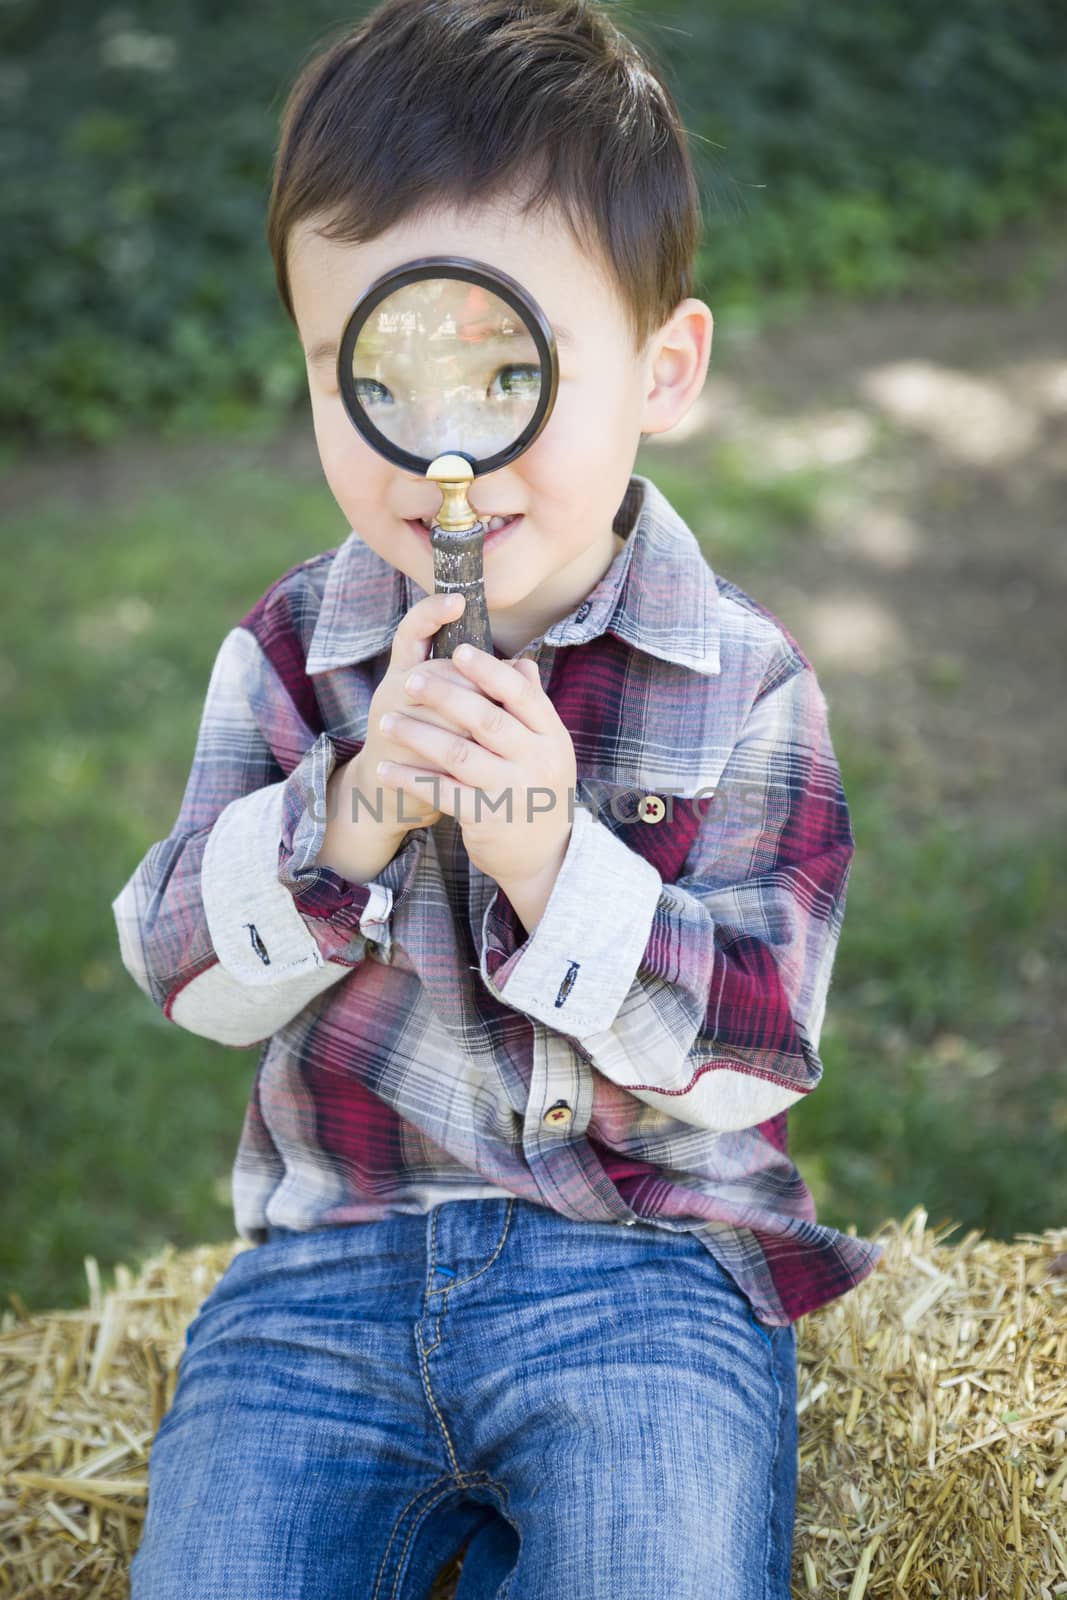 Cute Young Mixed Race Boy Looking Through Magnifying Glass Outside on Hay Bale.